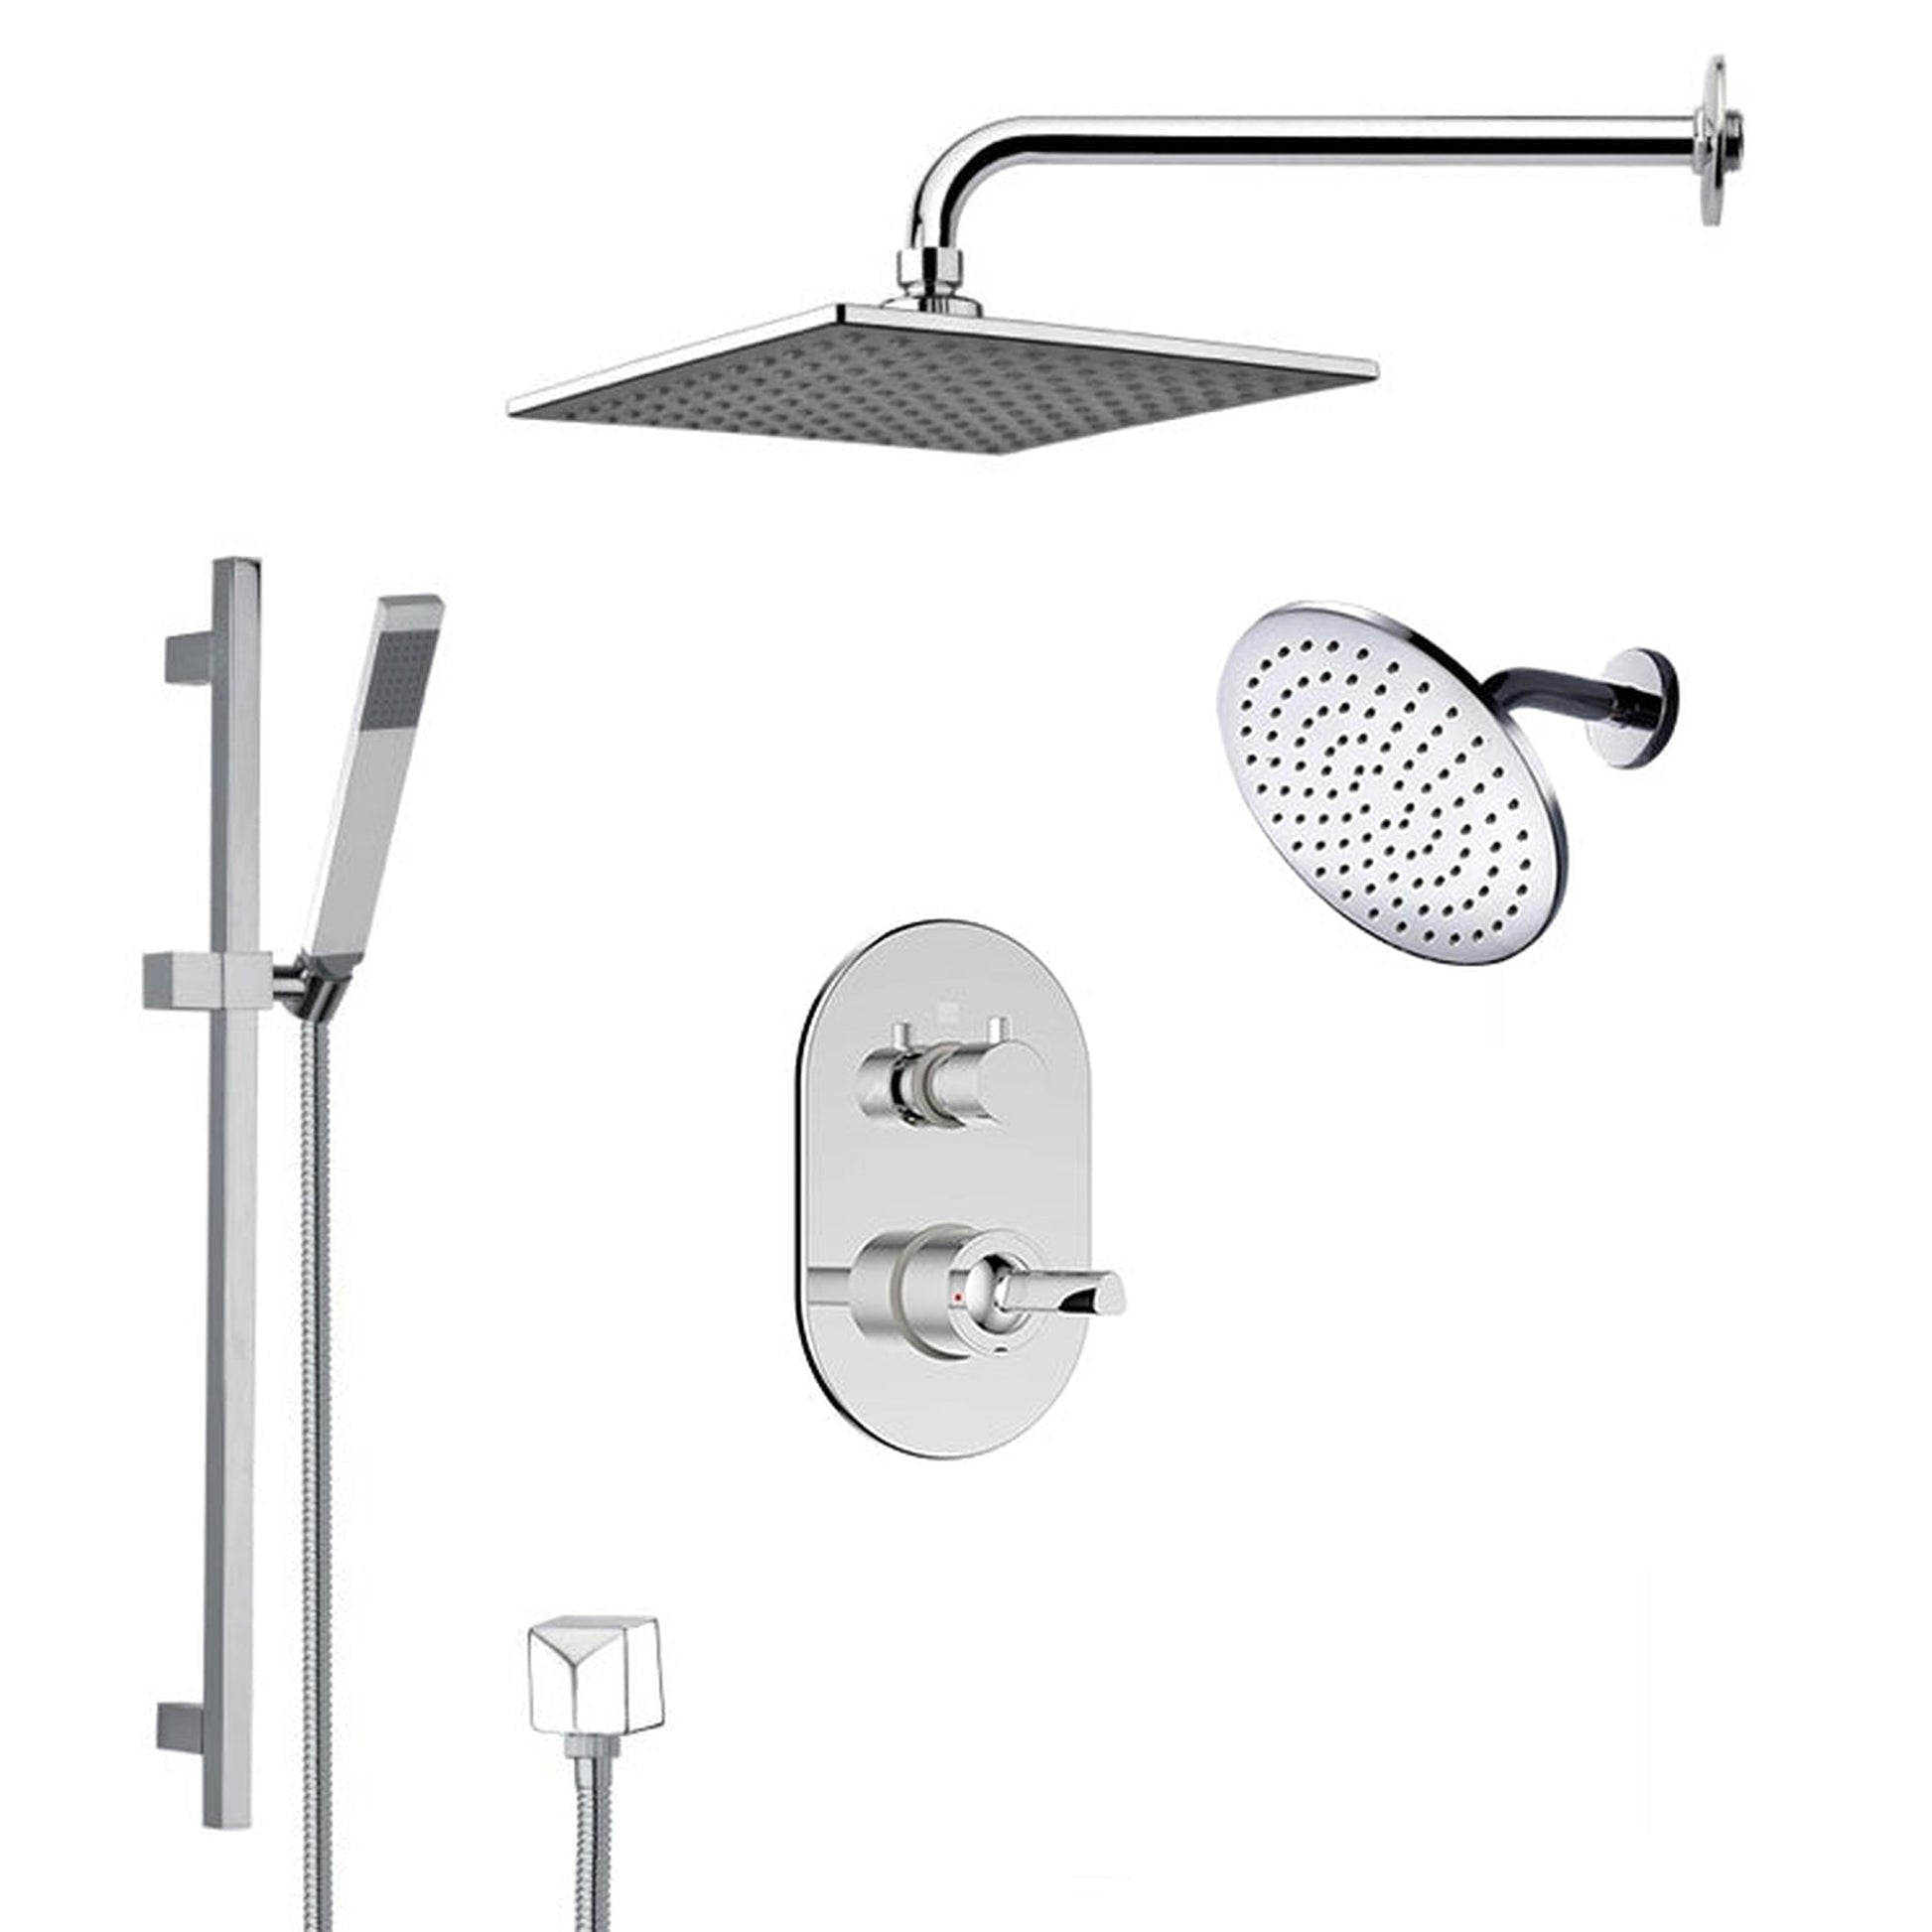 FontanaShowers Deluxe Designers 8" Chrome Wall-Mounted Square & Big Round Dual Shower Head Rainfall Shower System With Slide Bar and Hand Shower